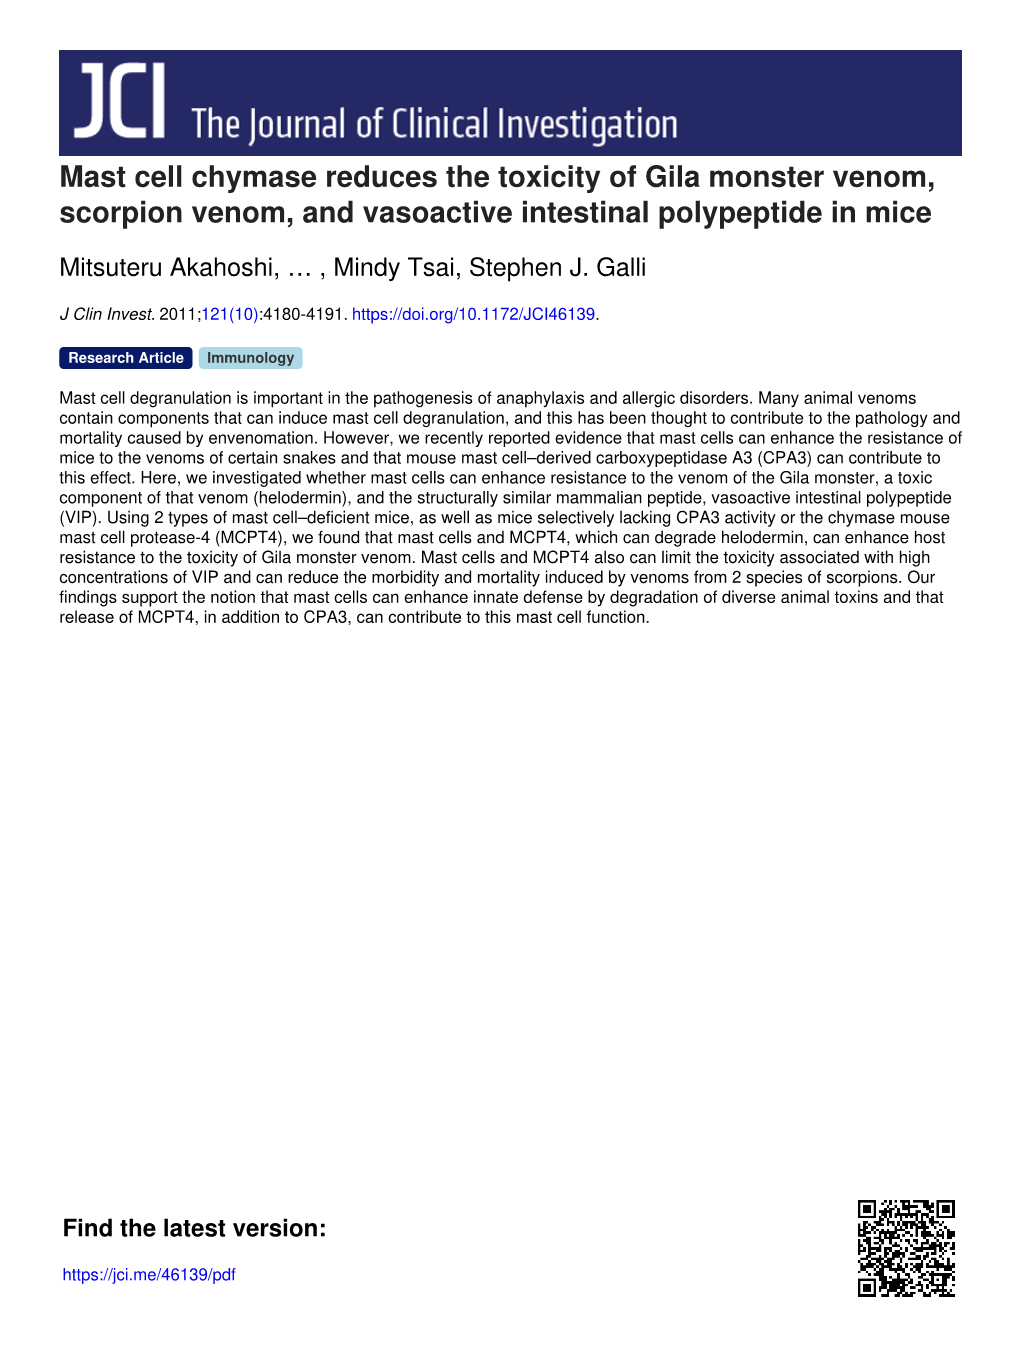 Mast Cell Chymase Reduces the Toxicity of Gila Monster Venom, Scorpion Venom, and Vasoactive Intestinal Polypeptide in Mice